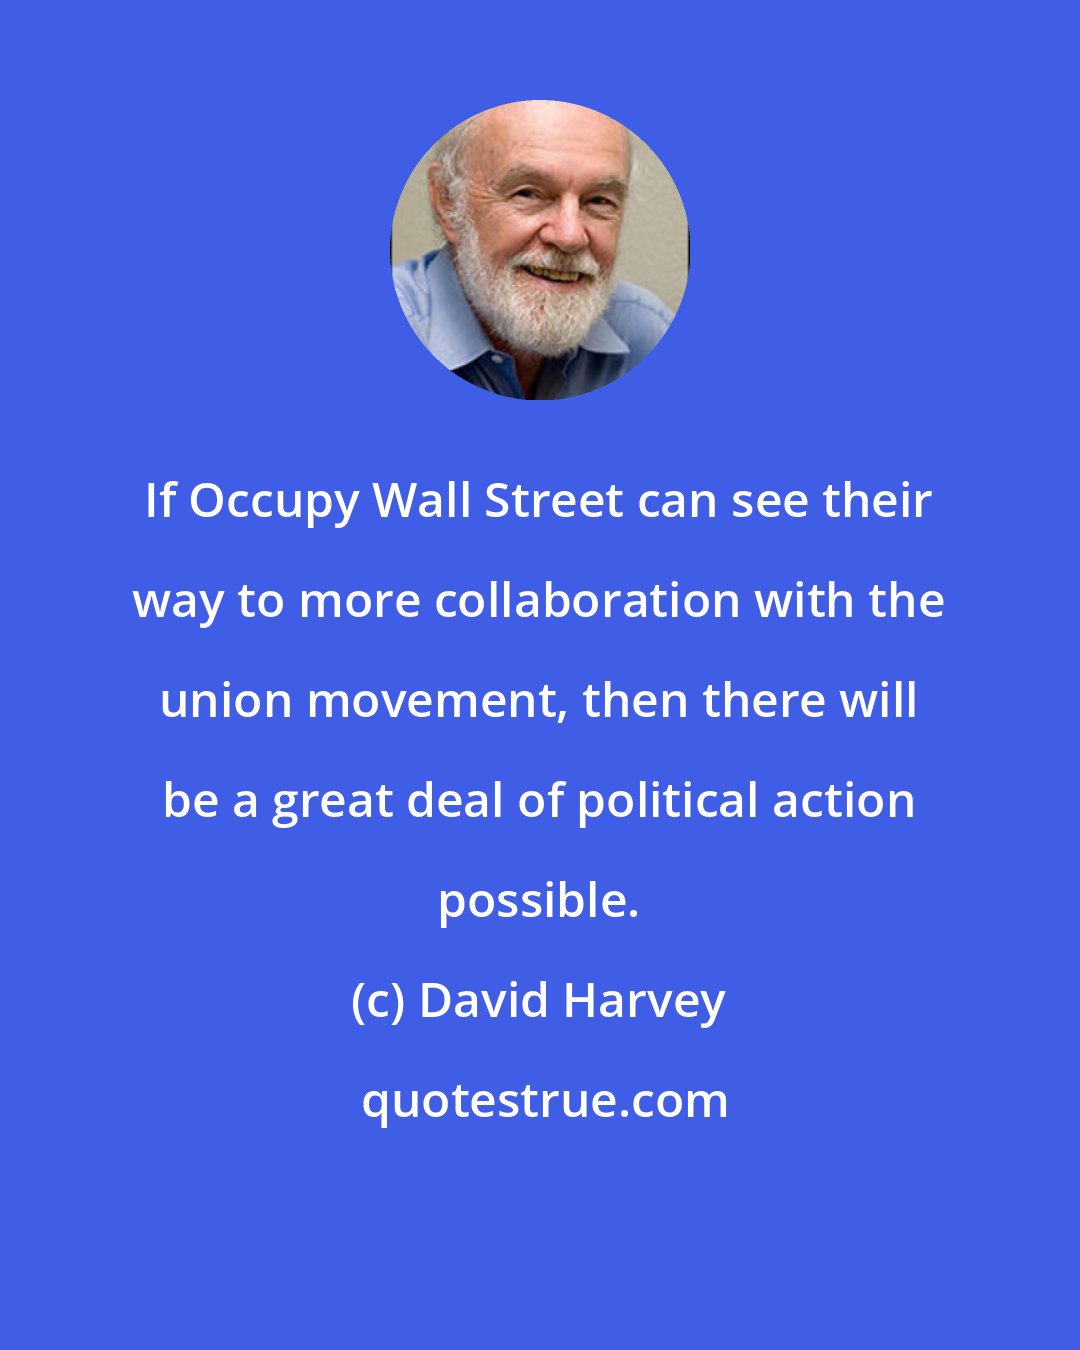 David Harvey: If Occupy Wall Street can see their way to more collaboration with the union movement, then there will be a great deal of political action possible.